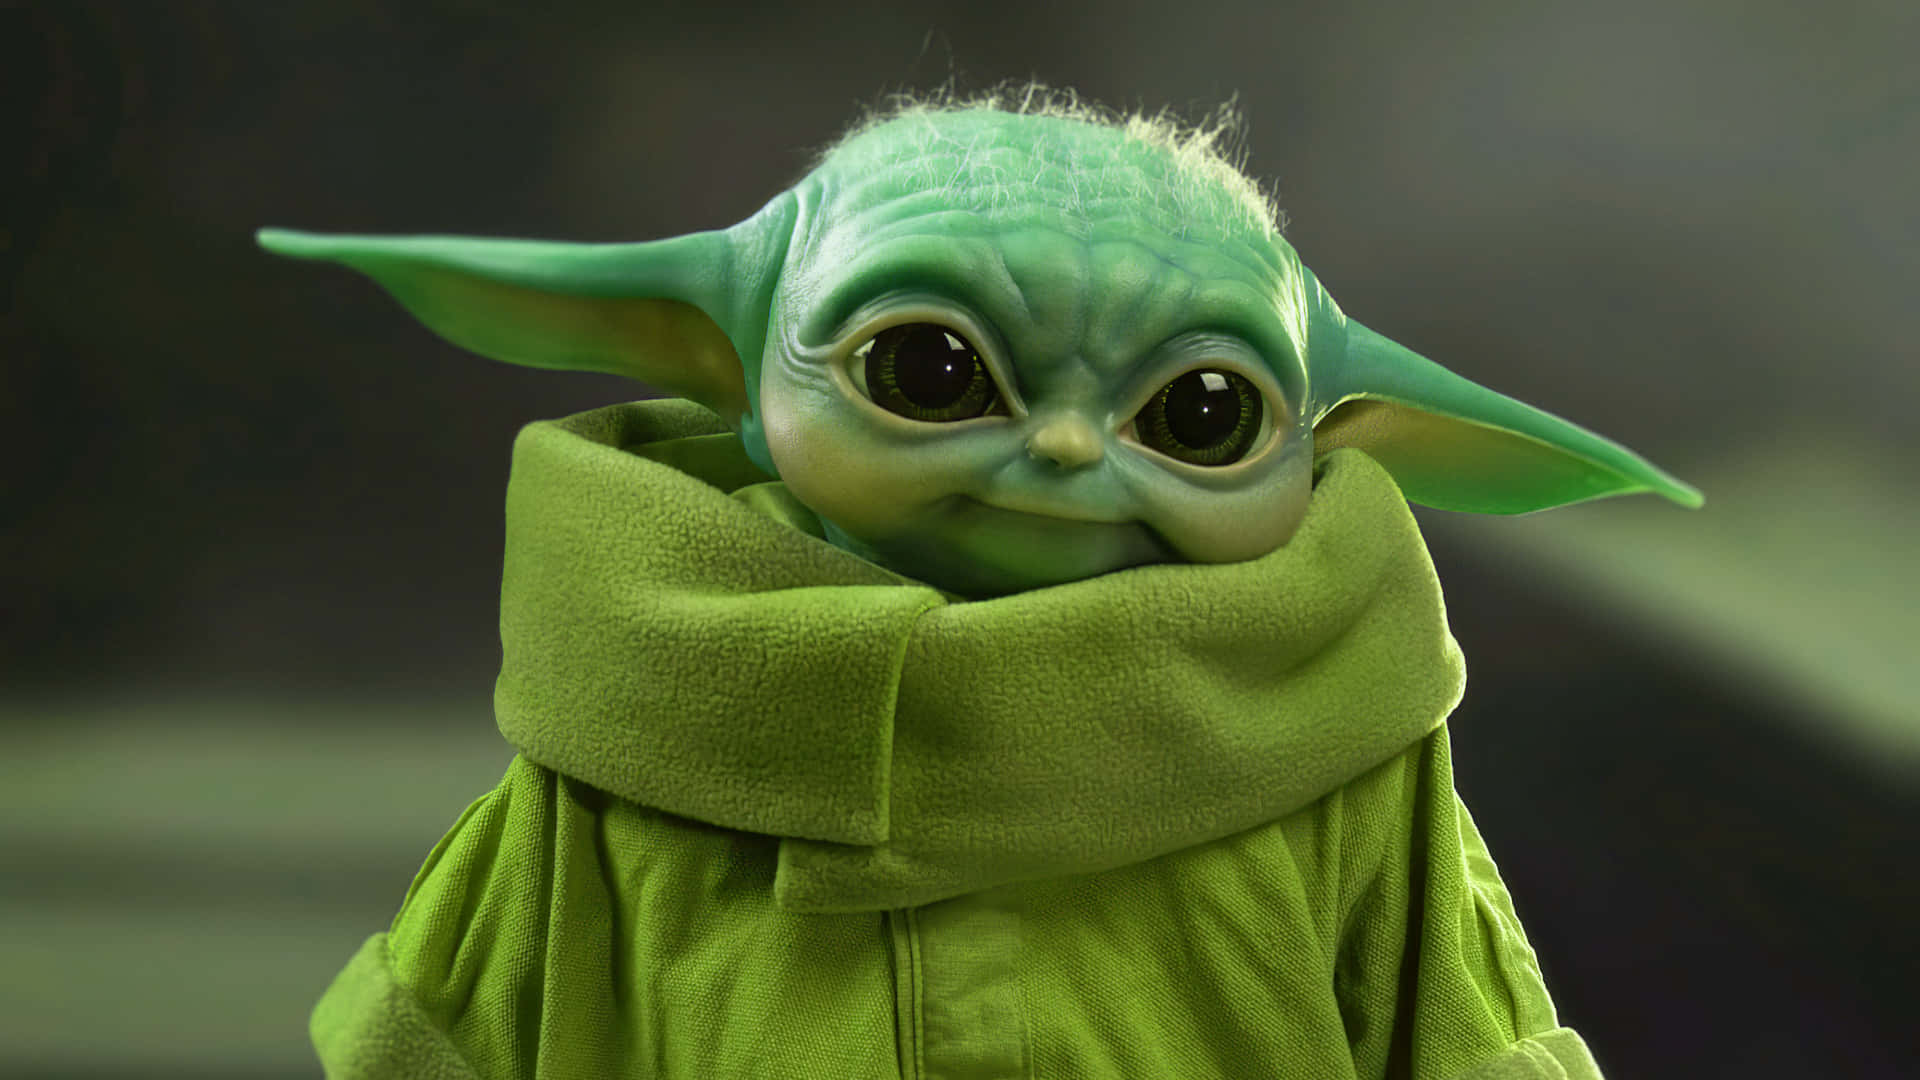 Baby Yoda Aesthetic In Green Outfit Wallpaper